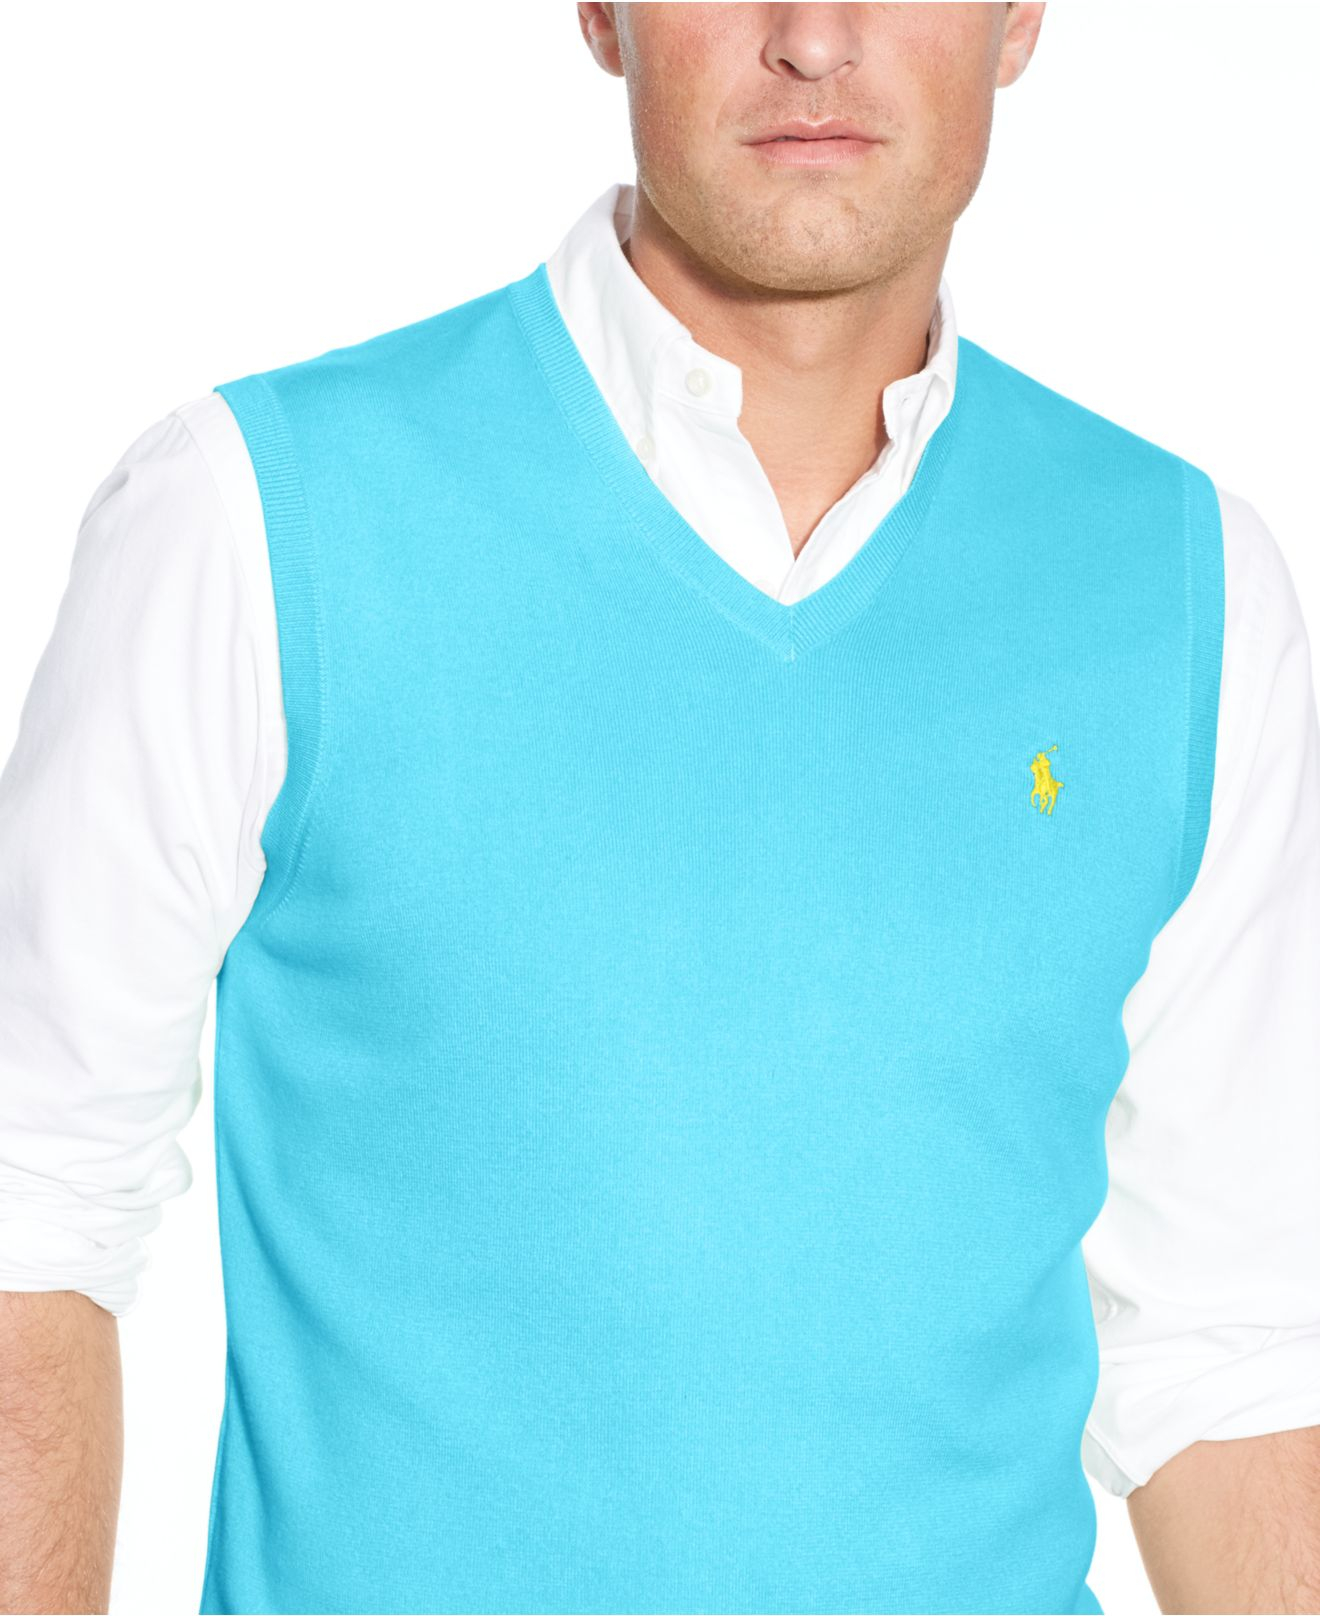 Polo ralph lauren Big And Tall Pima Cotton V-Neck Sweater Vest in Blue ...